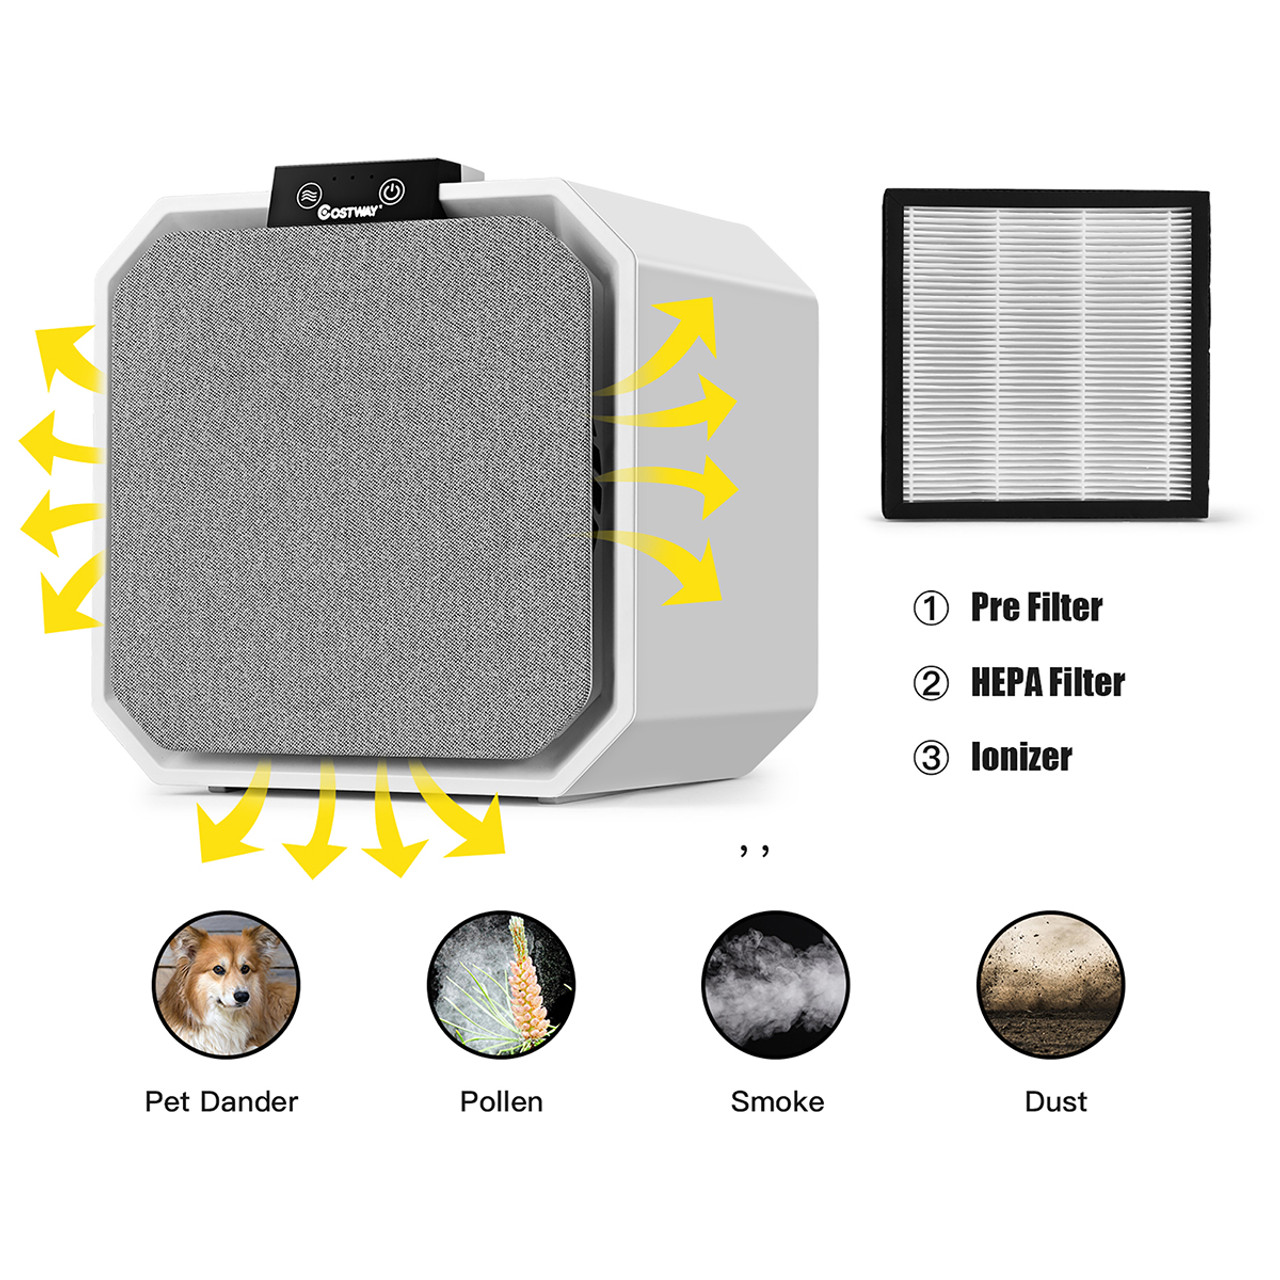 Desktop HEPA Air Purifier with 2-in-1 Composite Filter product image